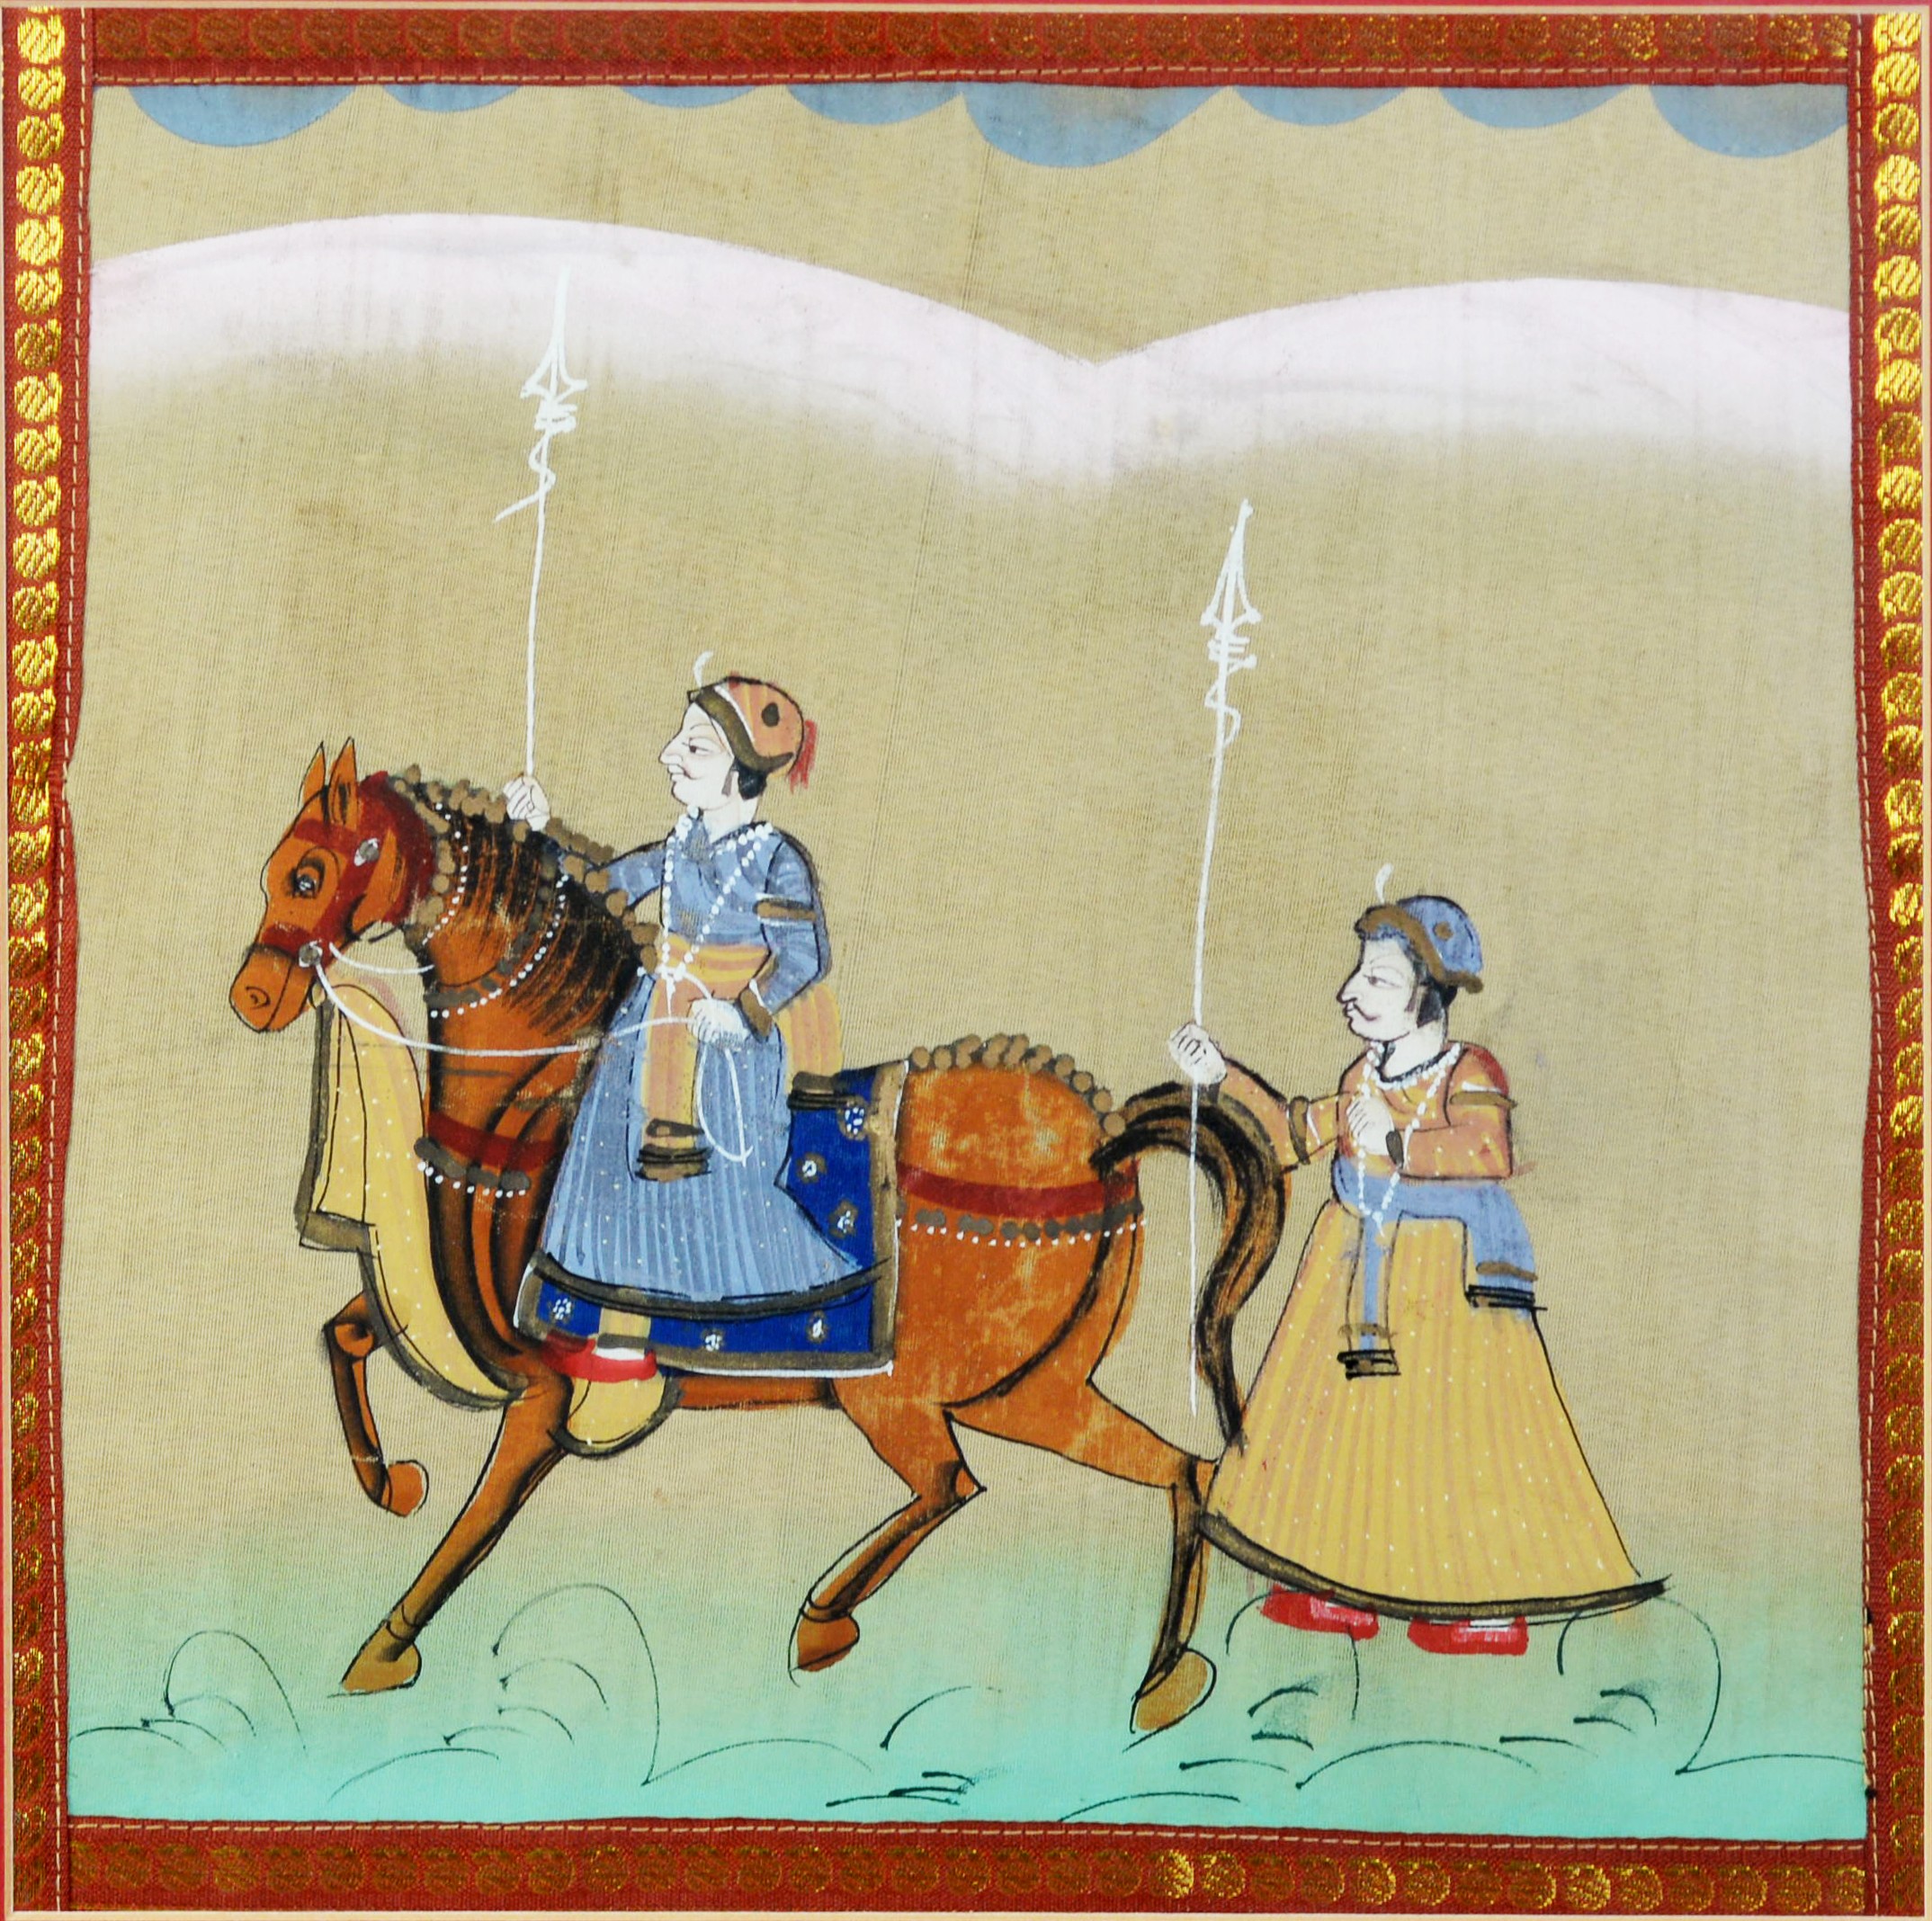 PAIR OF INDIAN GOUACHE DRAWINGS ON PAPER, EACH OF TWO WARRIORS, ONE ON HORSEBACK, within embroidered - Image 2 of 8